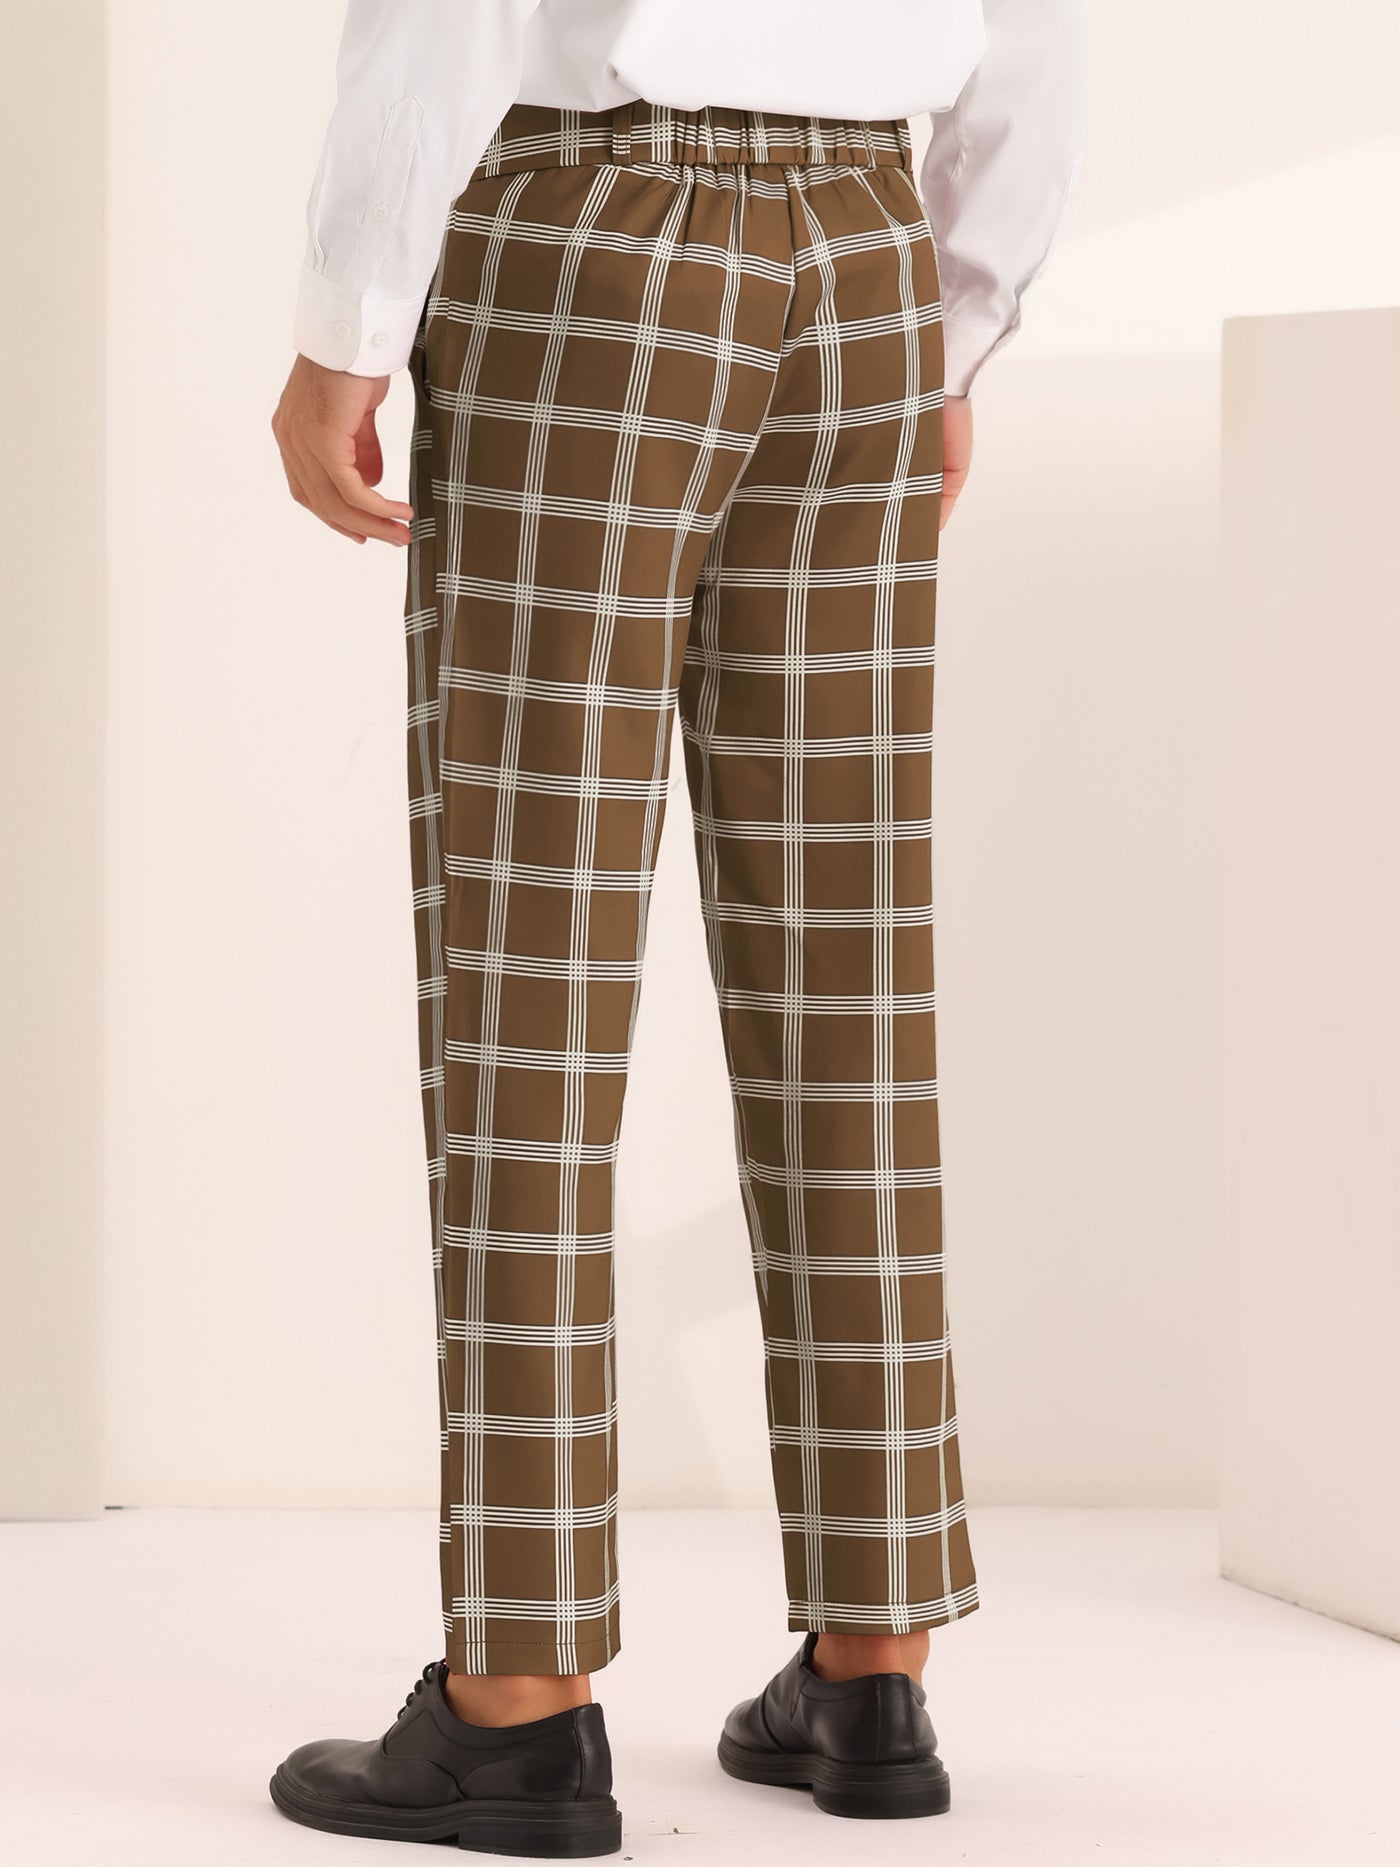 Bublédon Plaid Pattern Pants for Men's Slim Fit Flat Front Work Office Checked Trousers